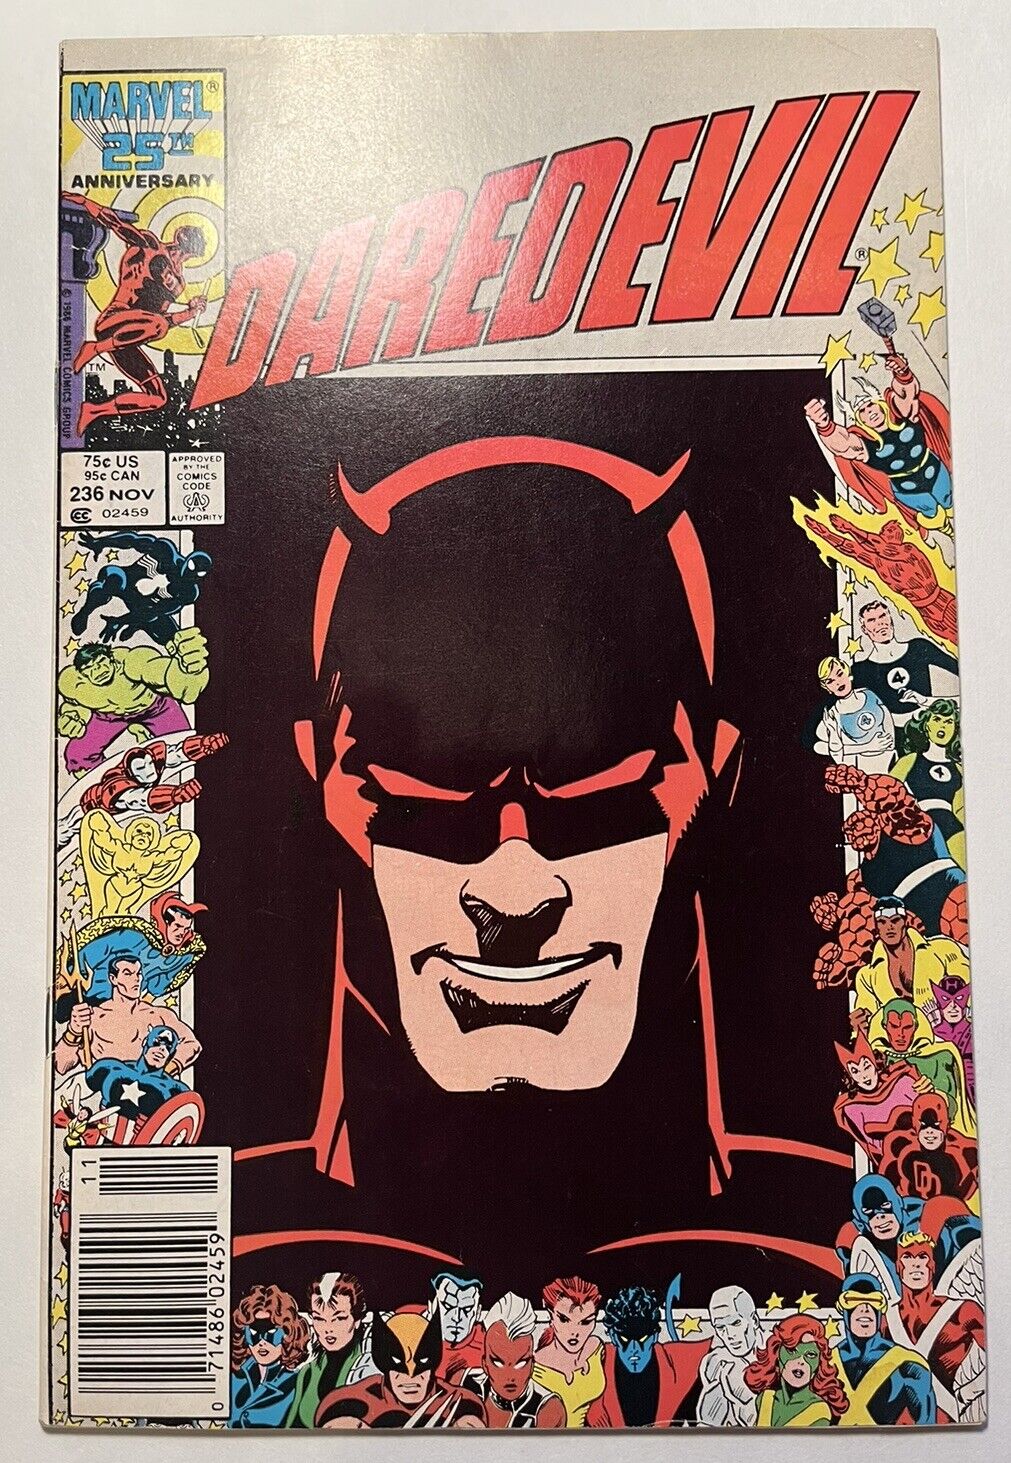 Daredevil #236 “MARK JEWELERS” Cleaned And Pressed